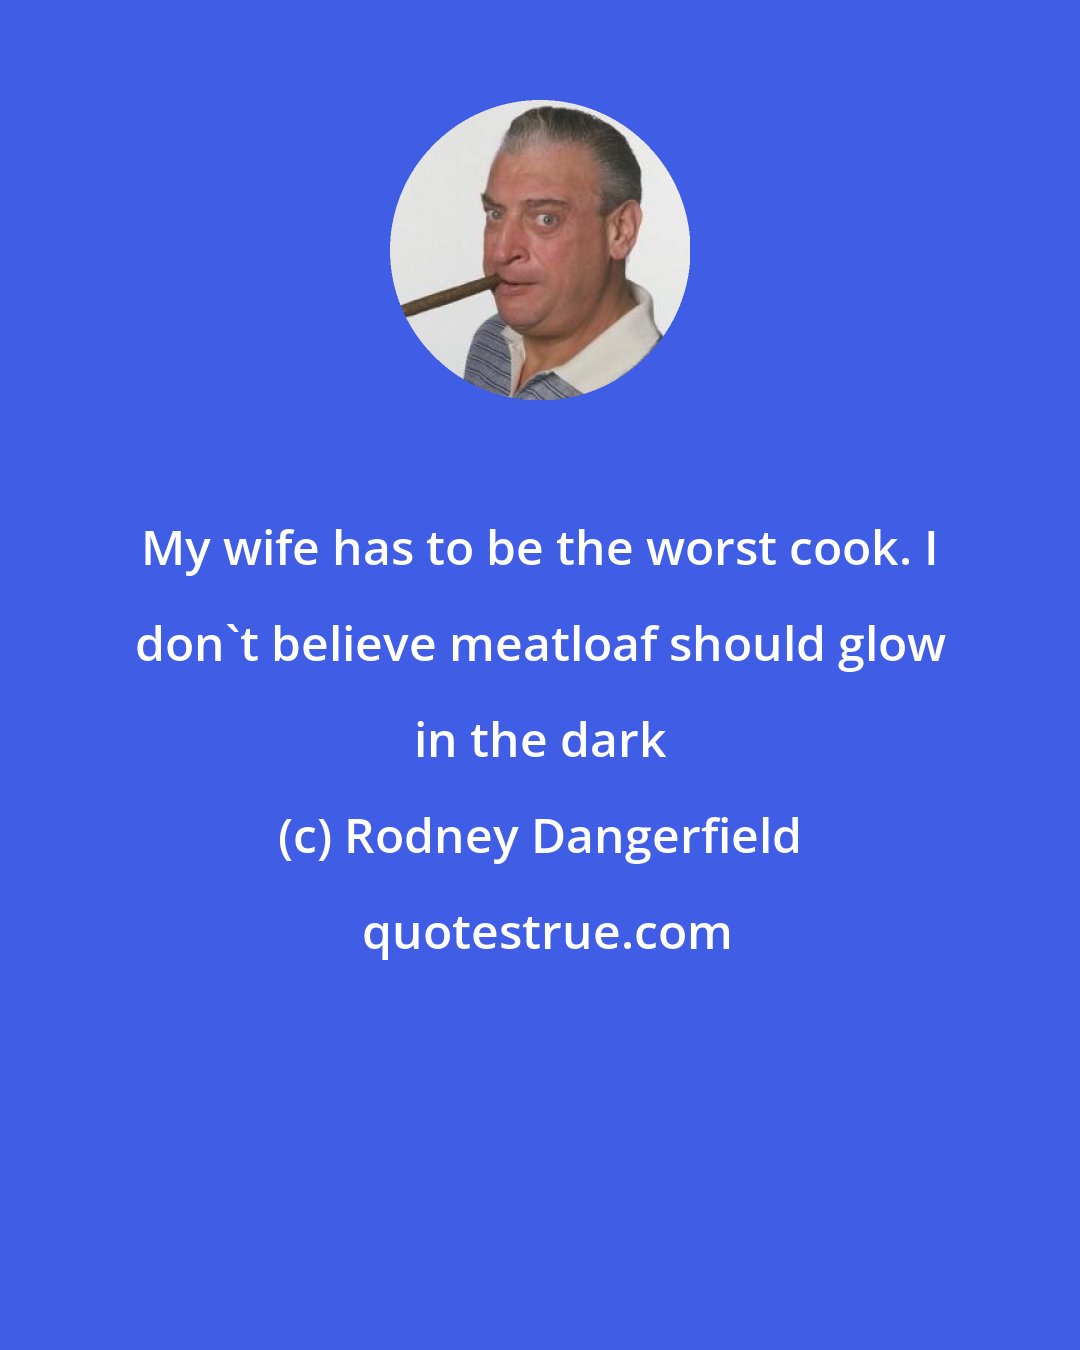 Rodney Dangerfield: My wife has to be the worst cook. I don't believe meatloaf should glow in the dark